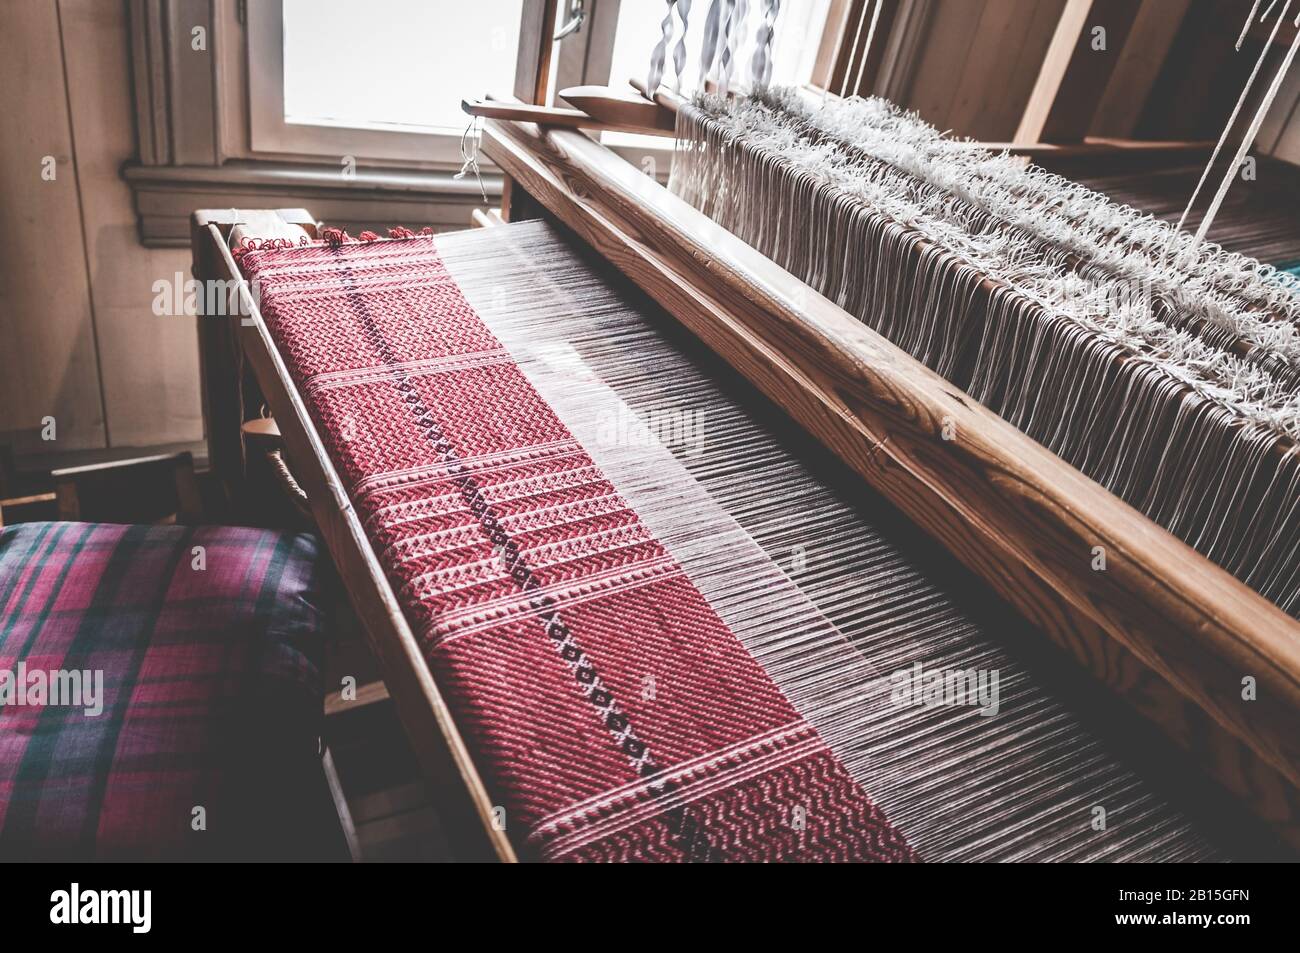 Traditional old vintage weaving loom as a professional handwork manufacturing tool for handmade weave production in a textile workshop. Stock Photo